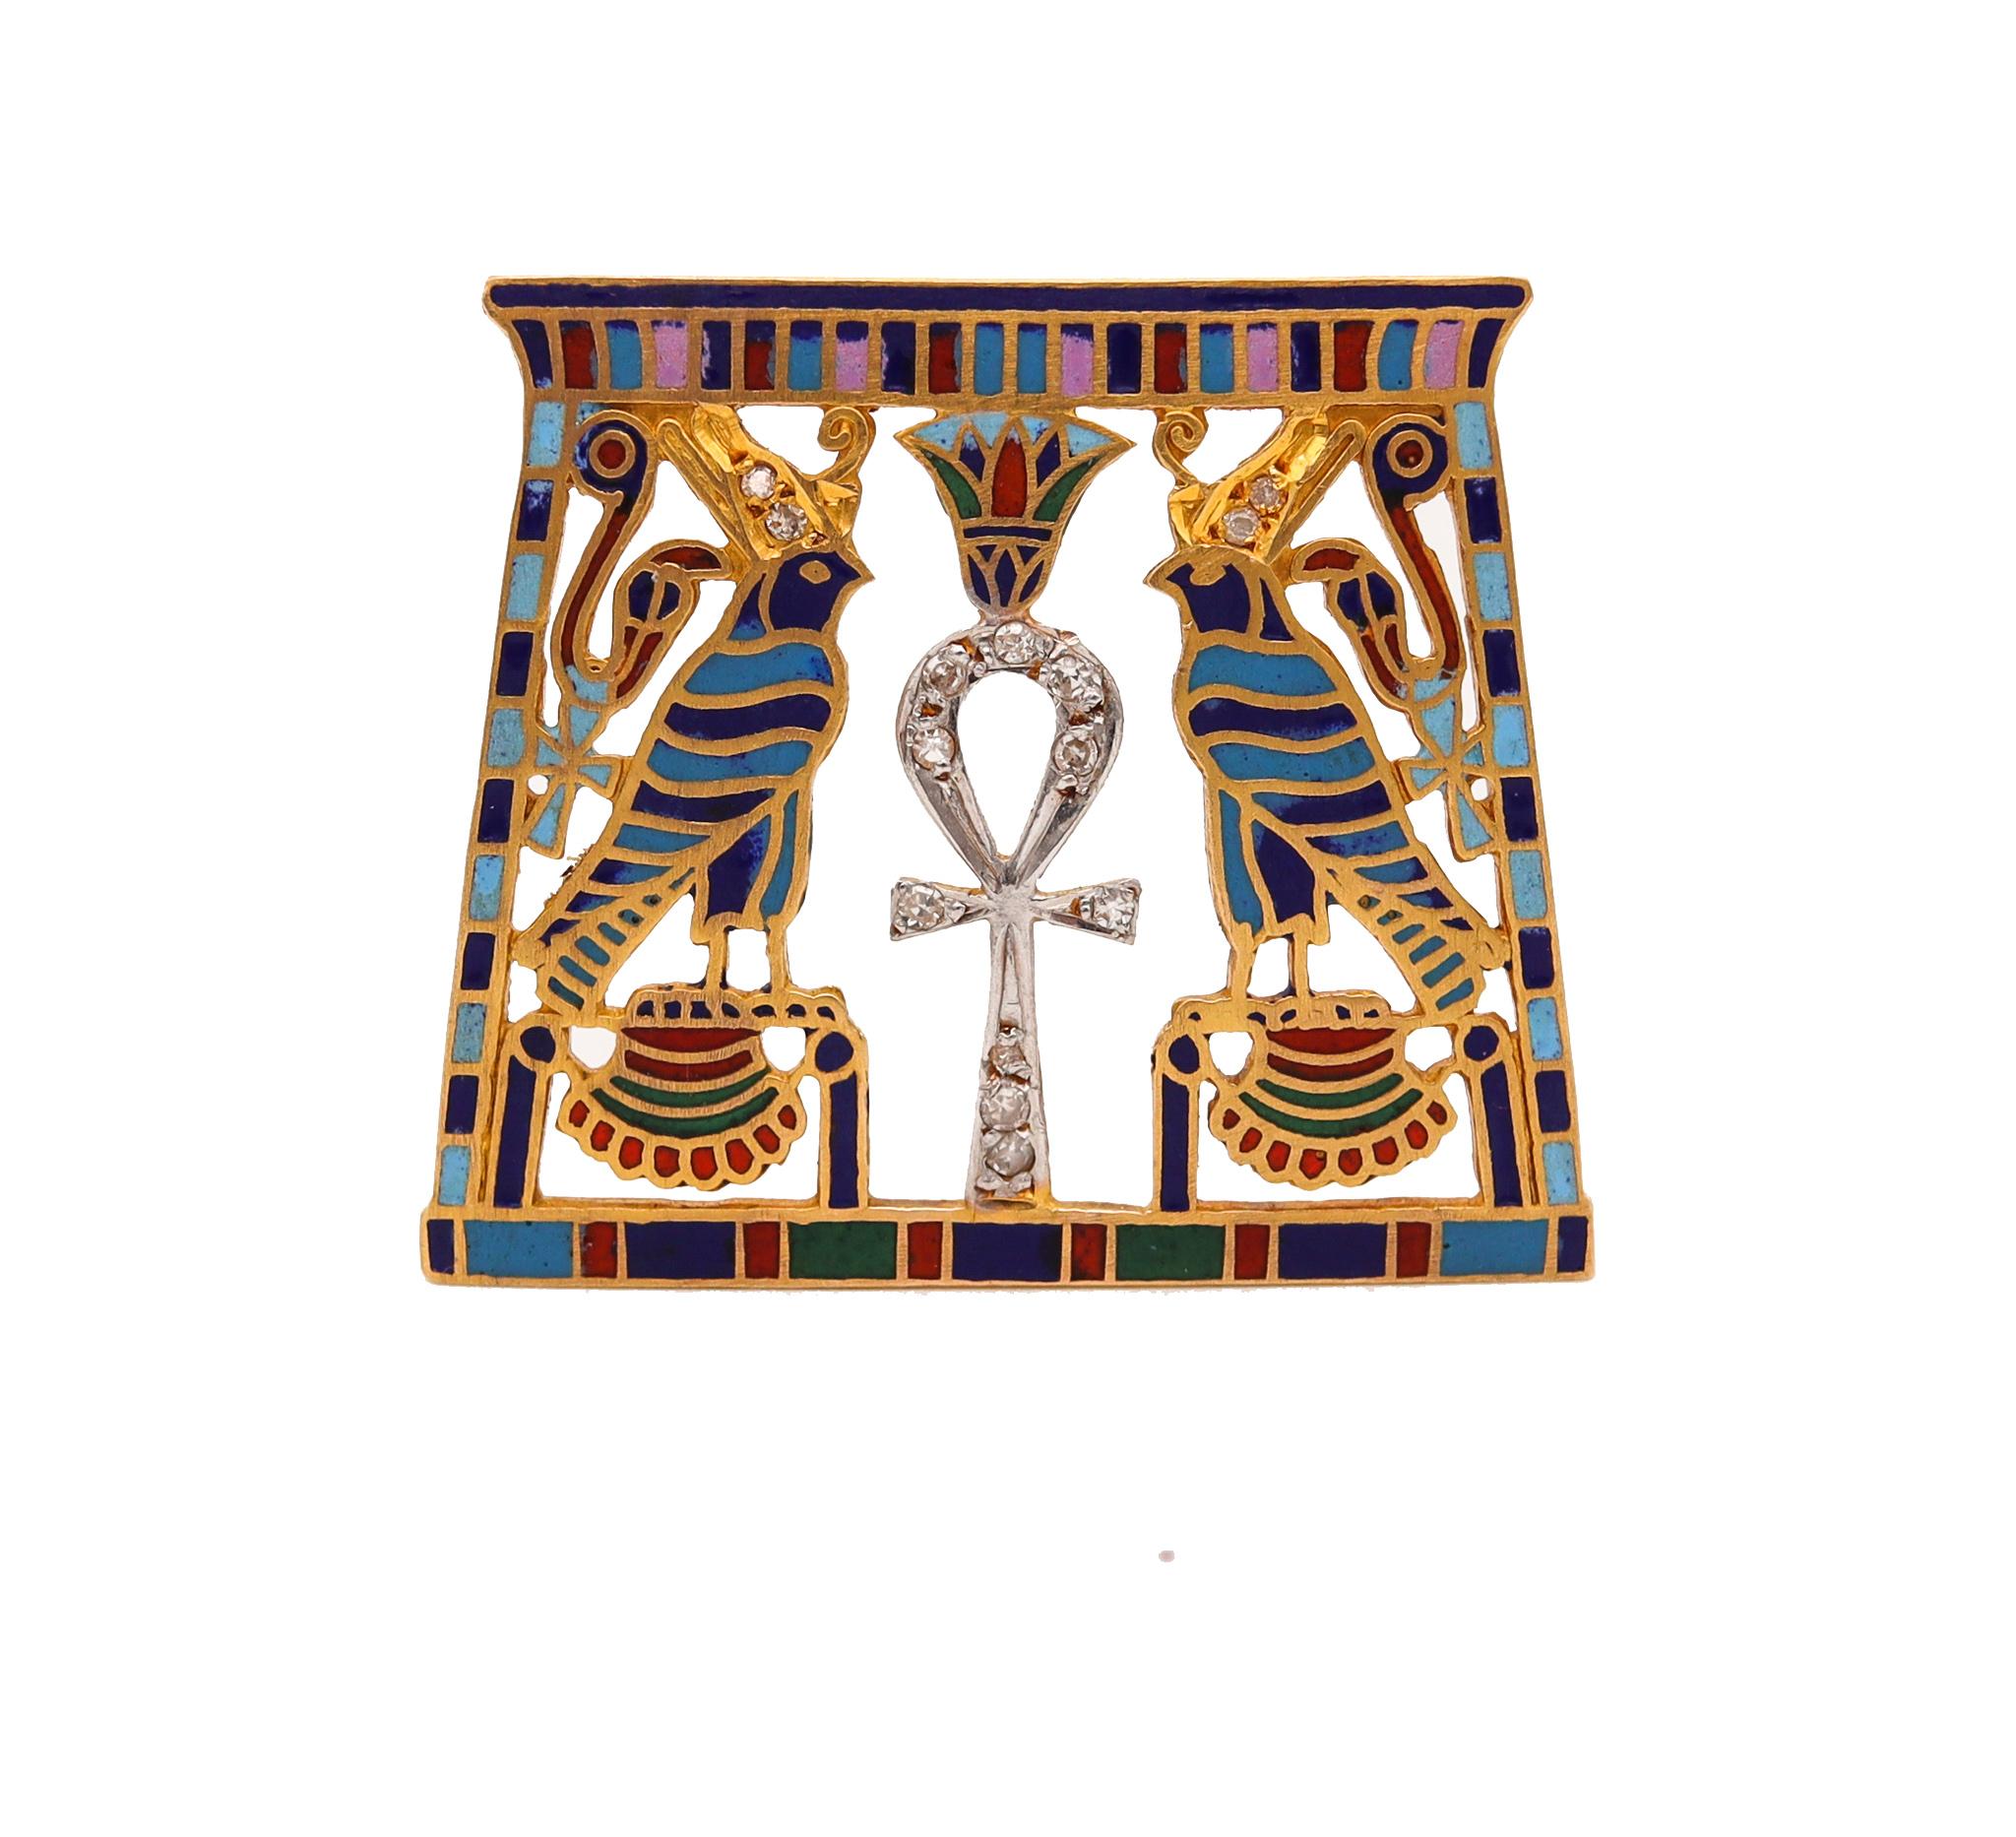 French art deco Egyptian revival necklace.

Fabulous and colorful piece, created in France during the art deco period, back in the 1930. This beautiful and rare pectoral pendant has been crafted in the Egyptian revival style in solid yellow gold of